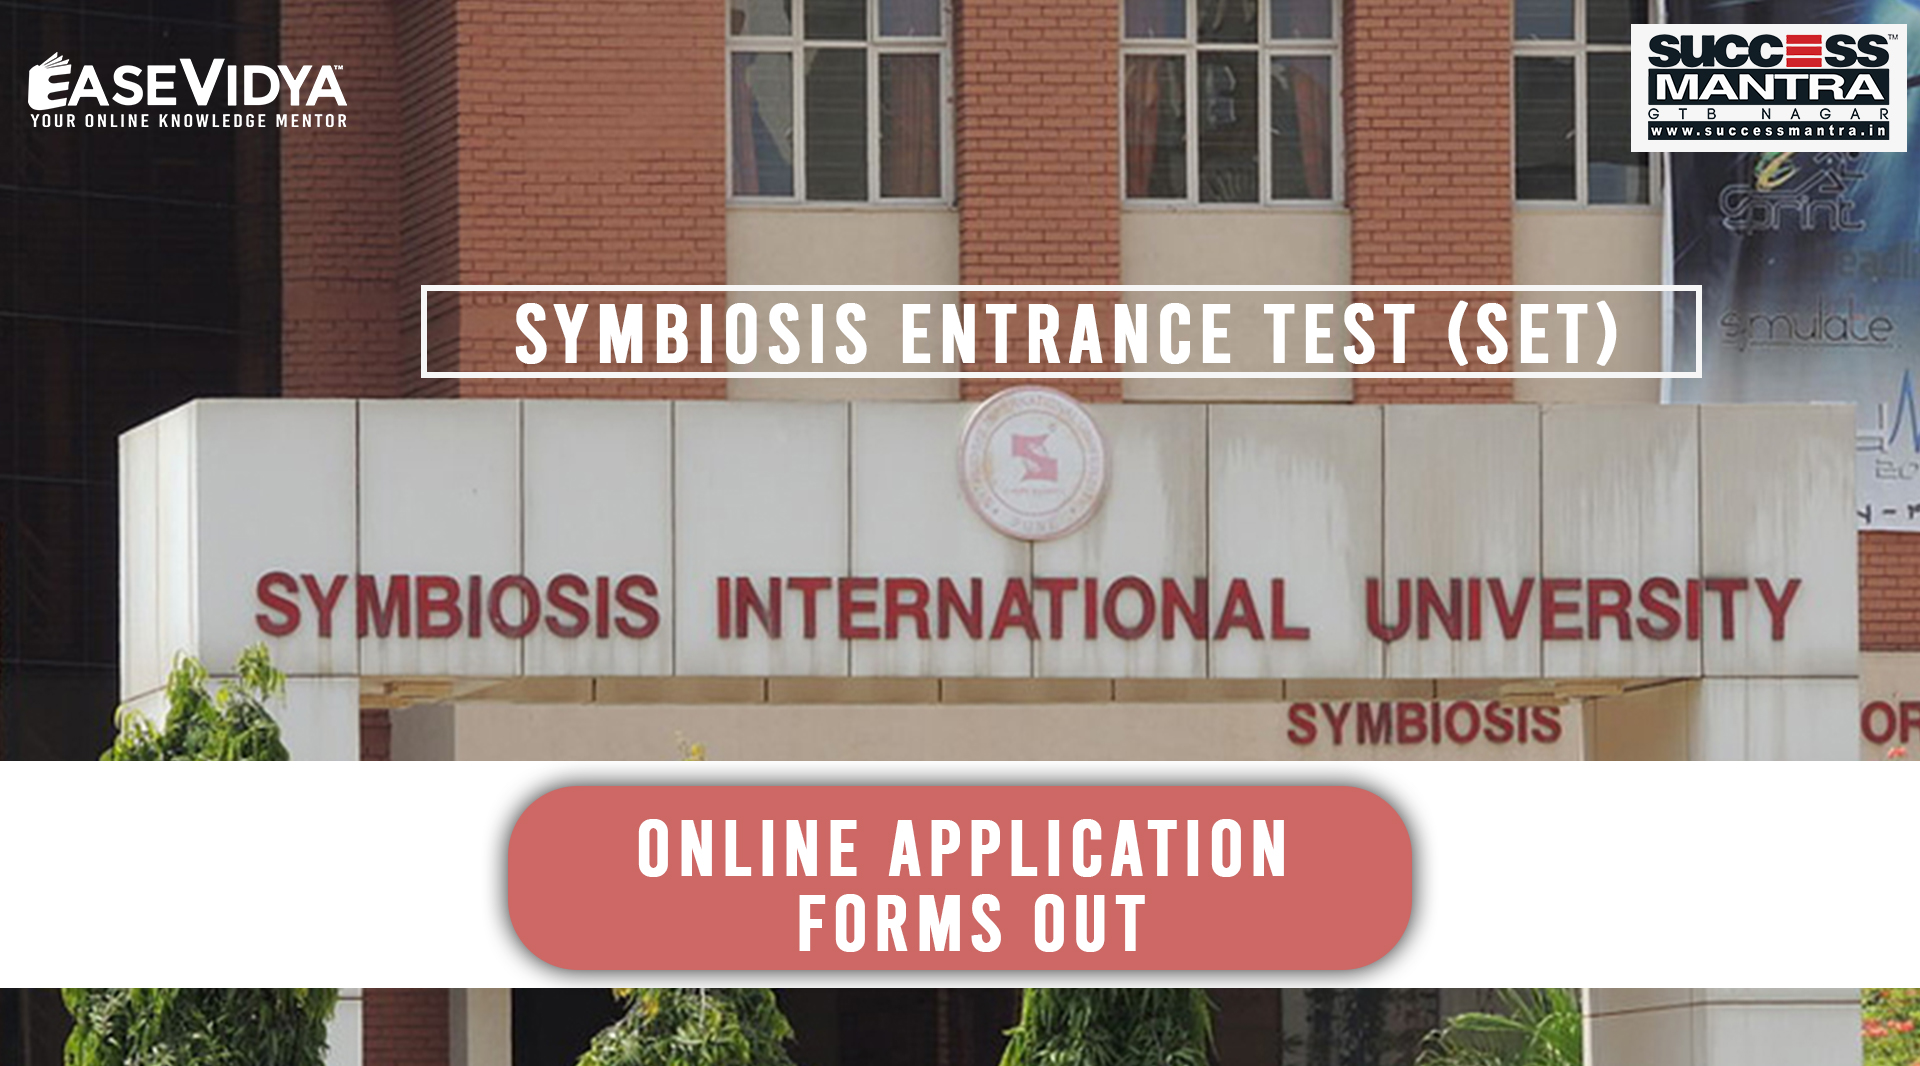 Symbiosis Entrance Test (SET) Application Forms Out and Applicable for BBA, BBA IT, BCA, B Sc in Culinary Arts, BA in Media n Communication